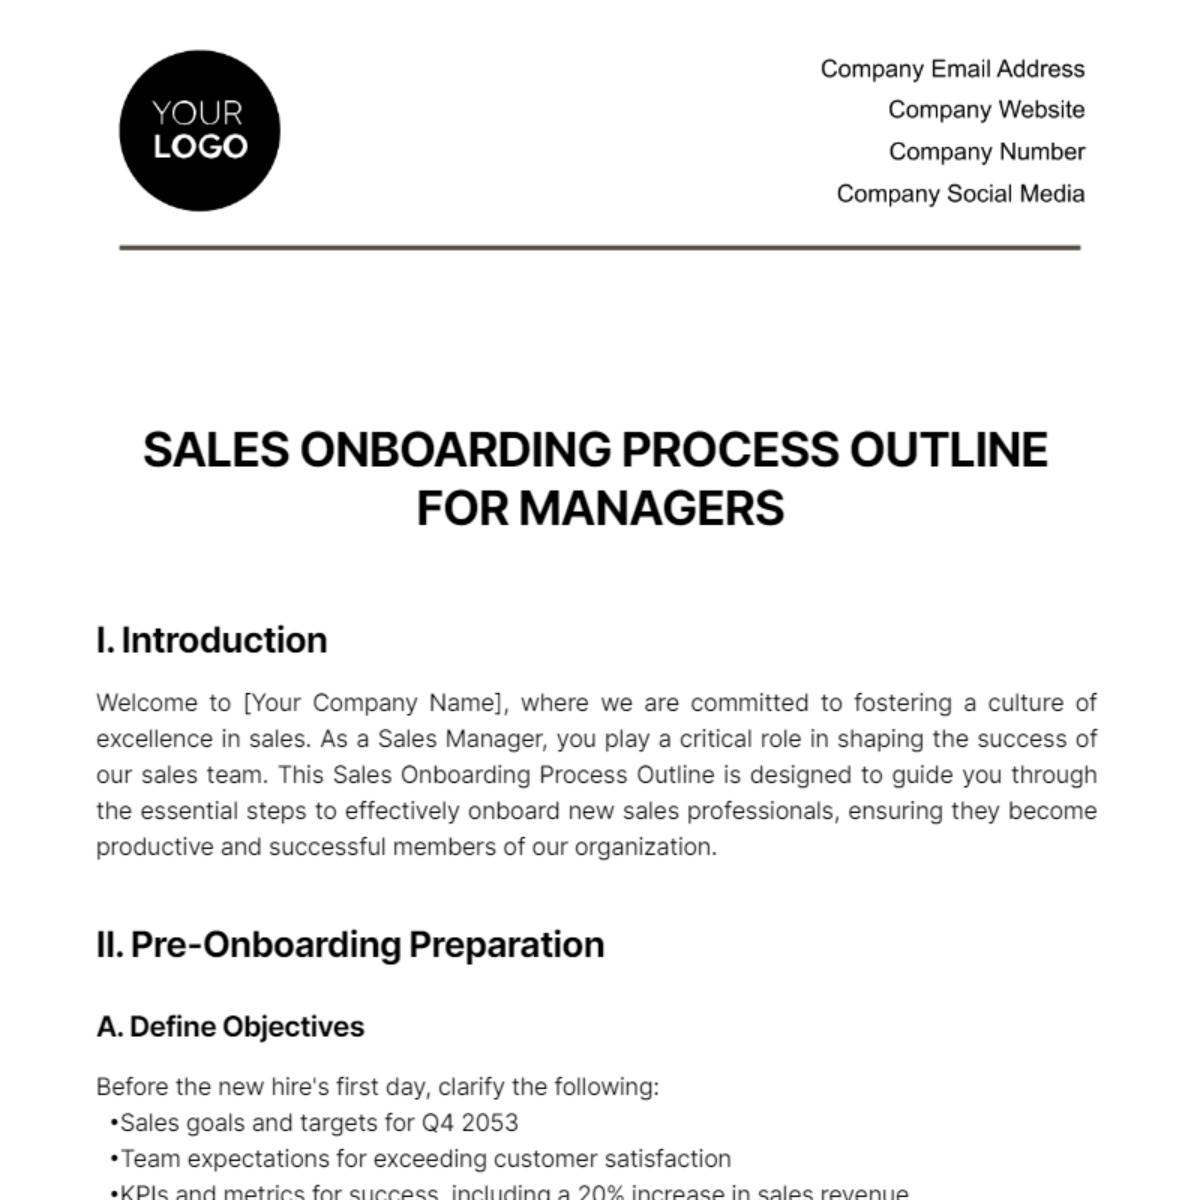 Sales Onboarding Process Outline for Managers Template